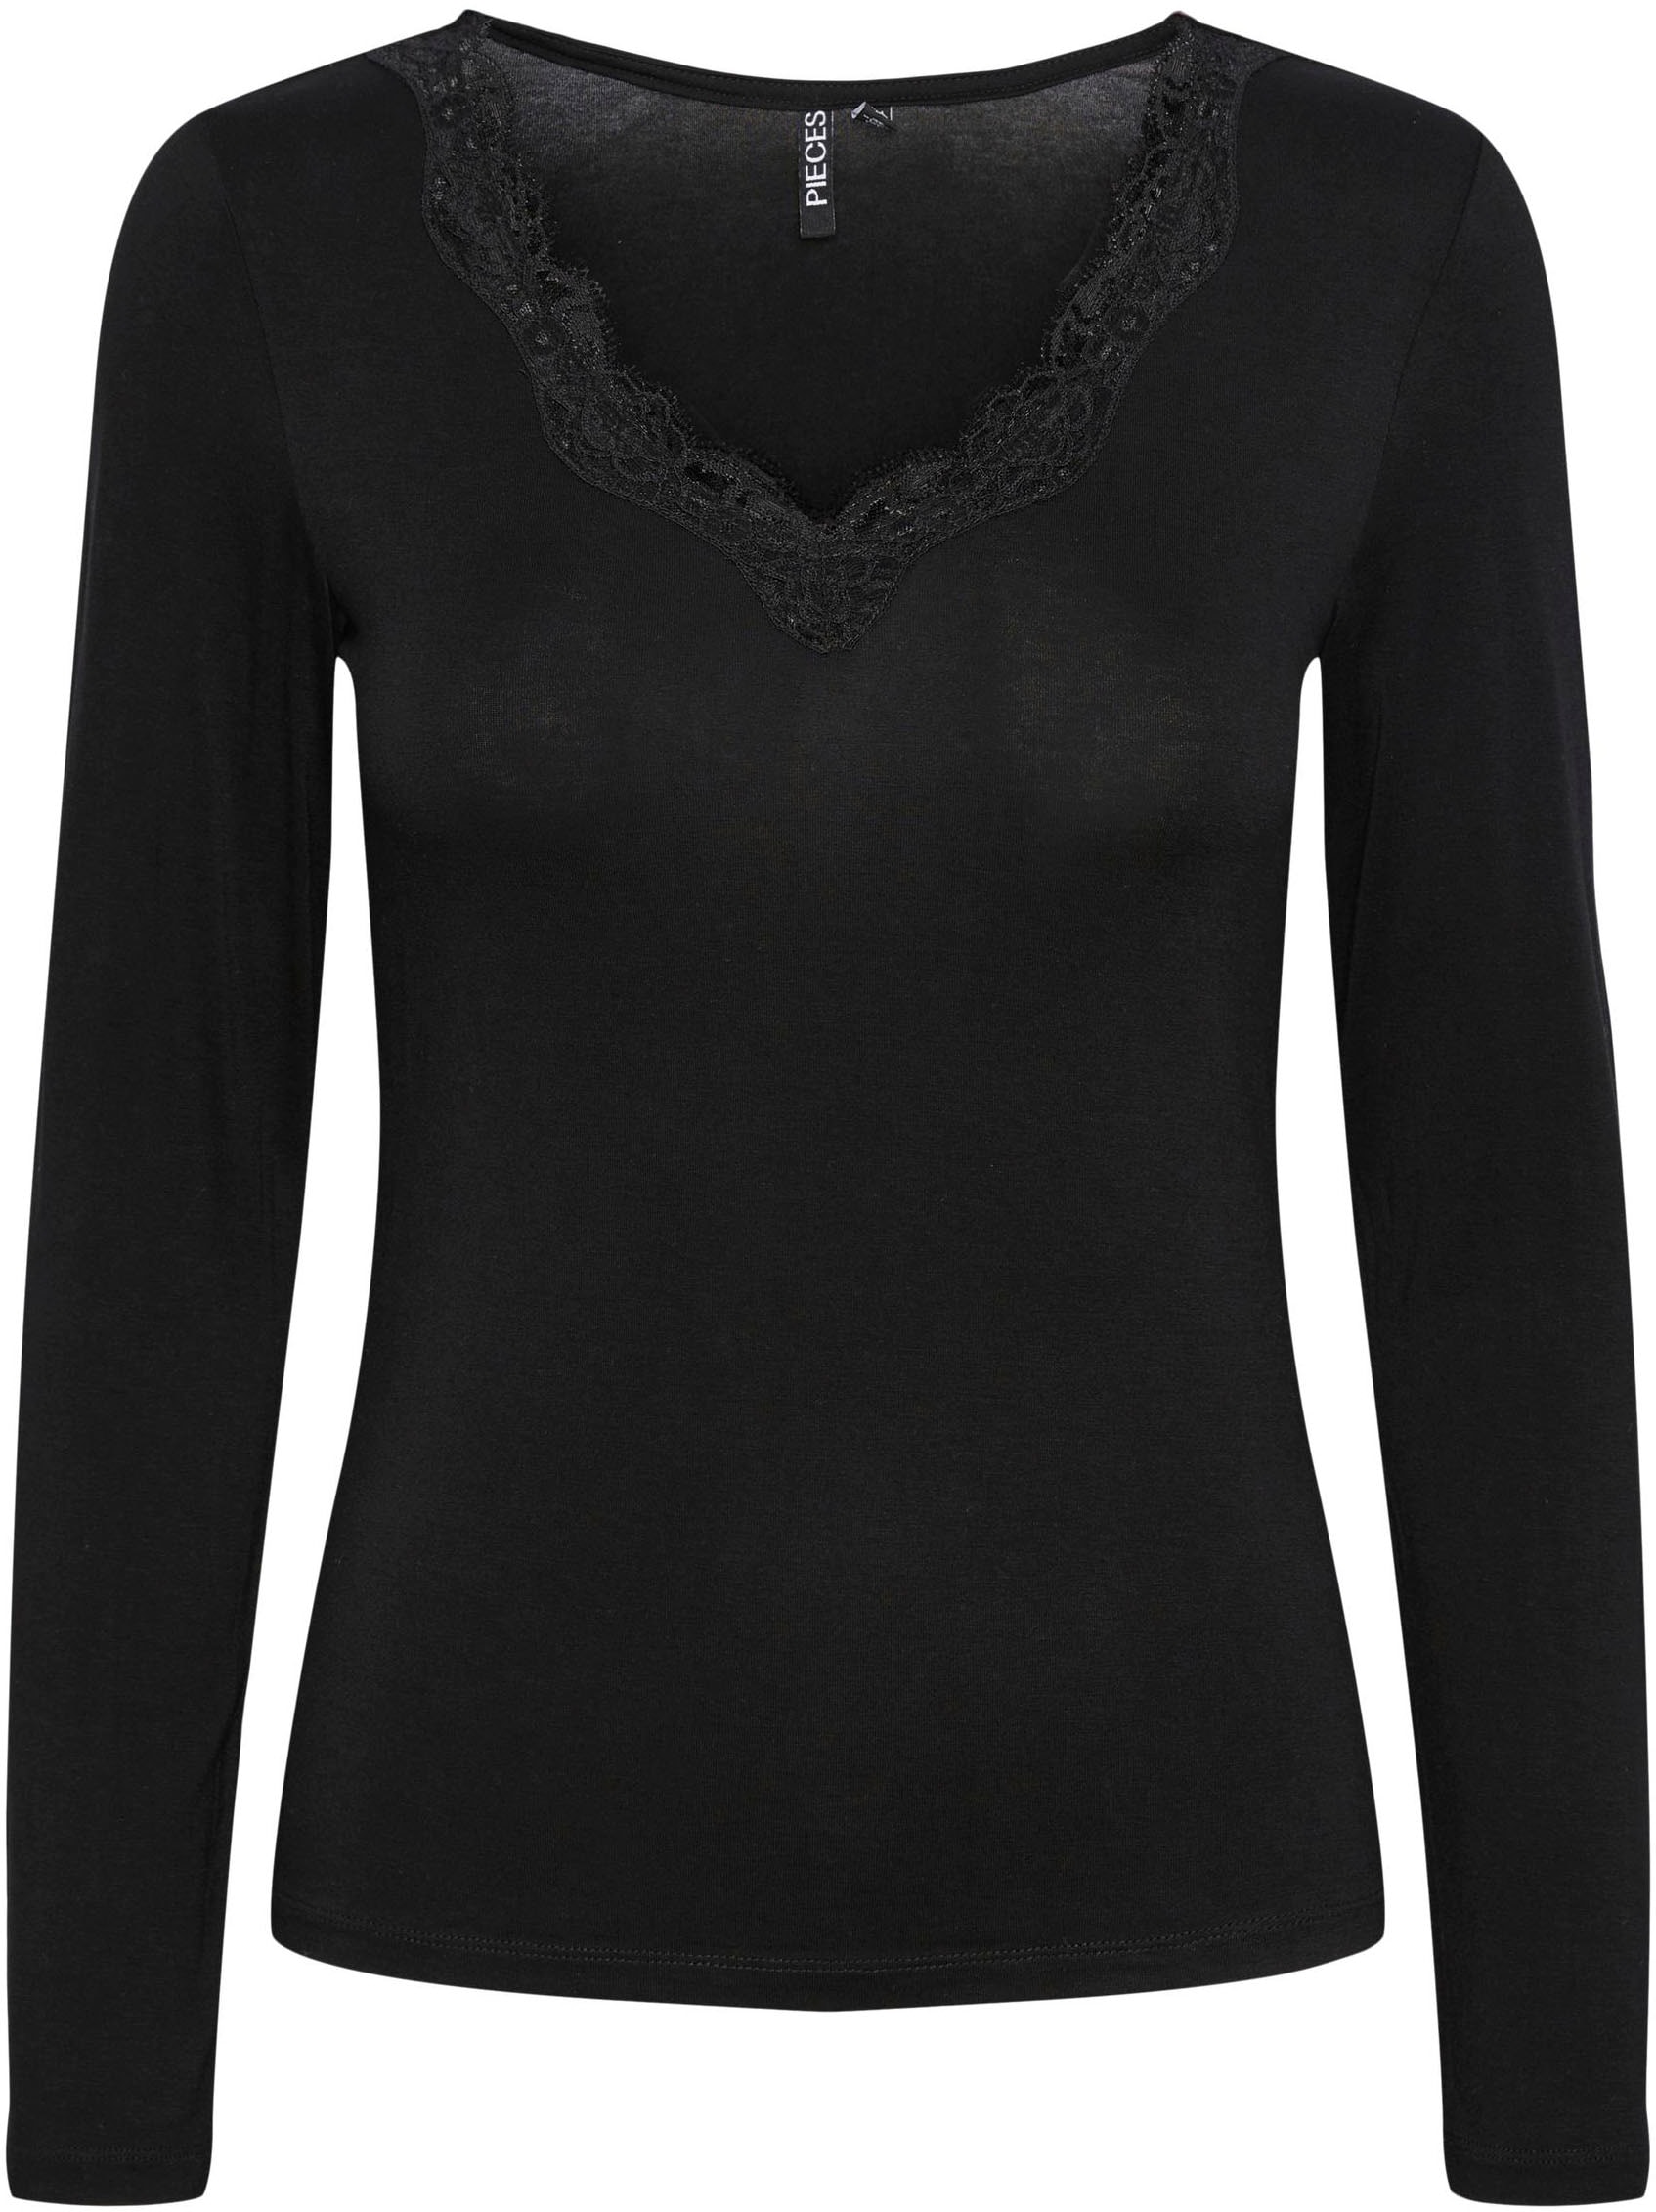 TOP OTTO bei »PCBARBERA V-Shirt NOOS LACE BC« LS pieces